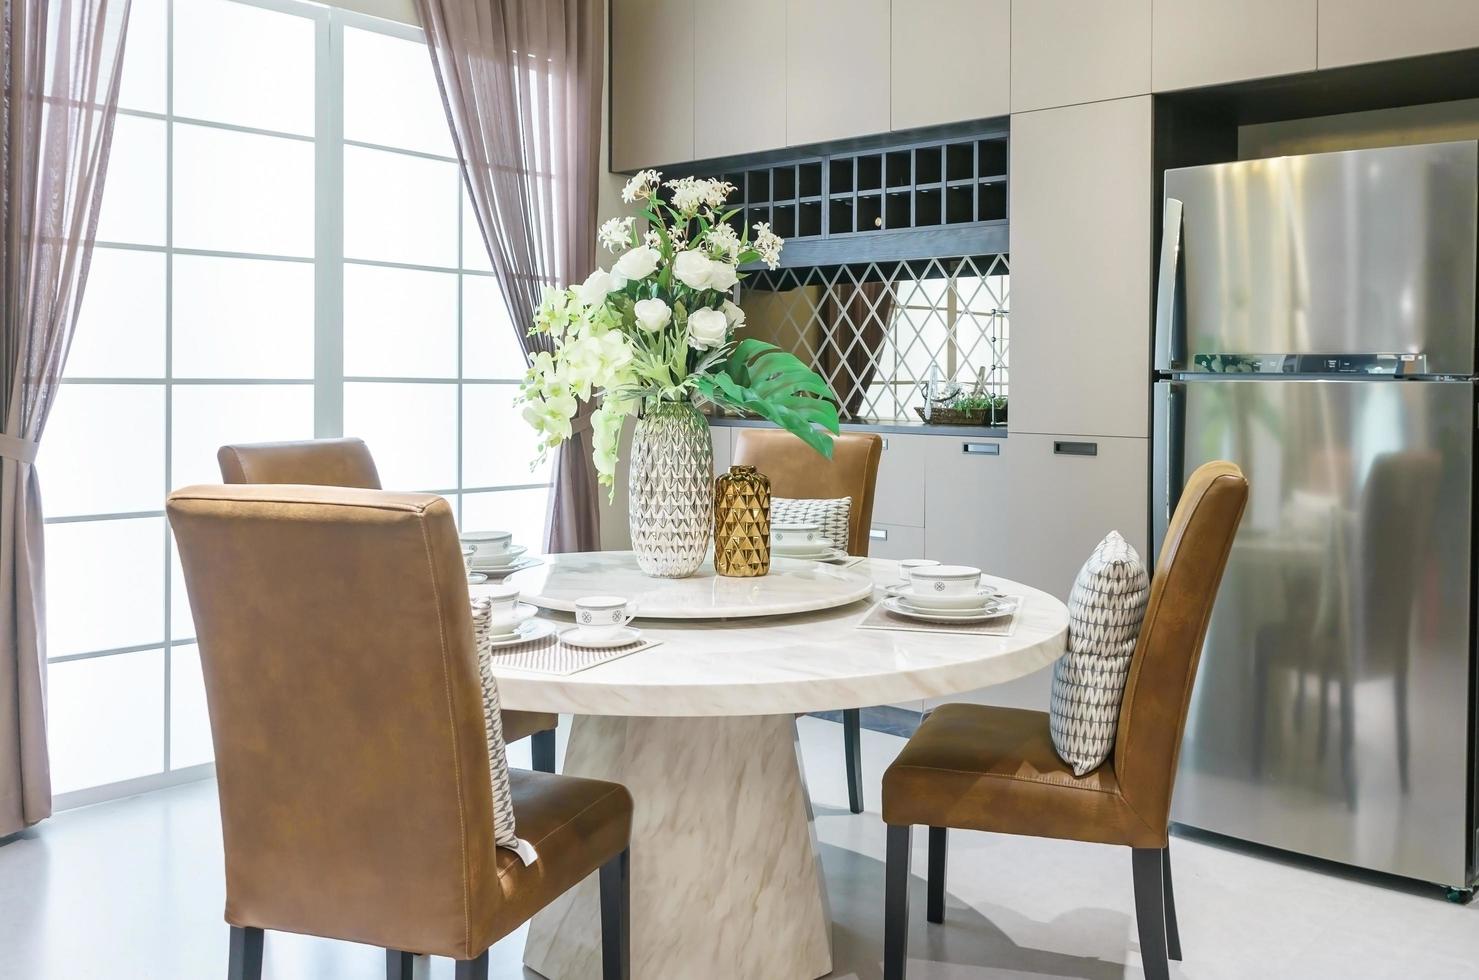 modern ceramic tableware in green color scheme setting on diningcc table in luxury house. photo